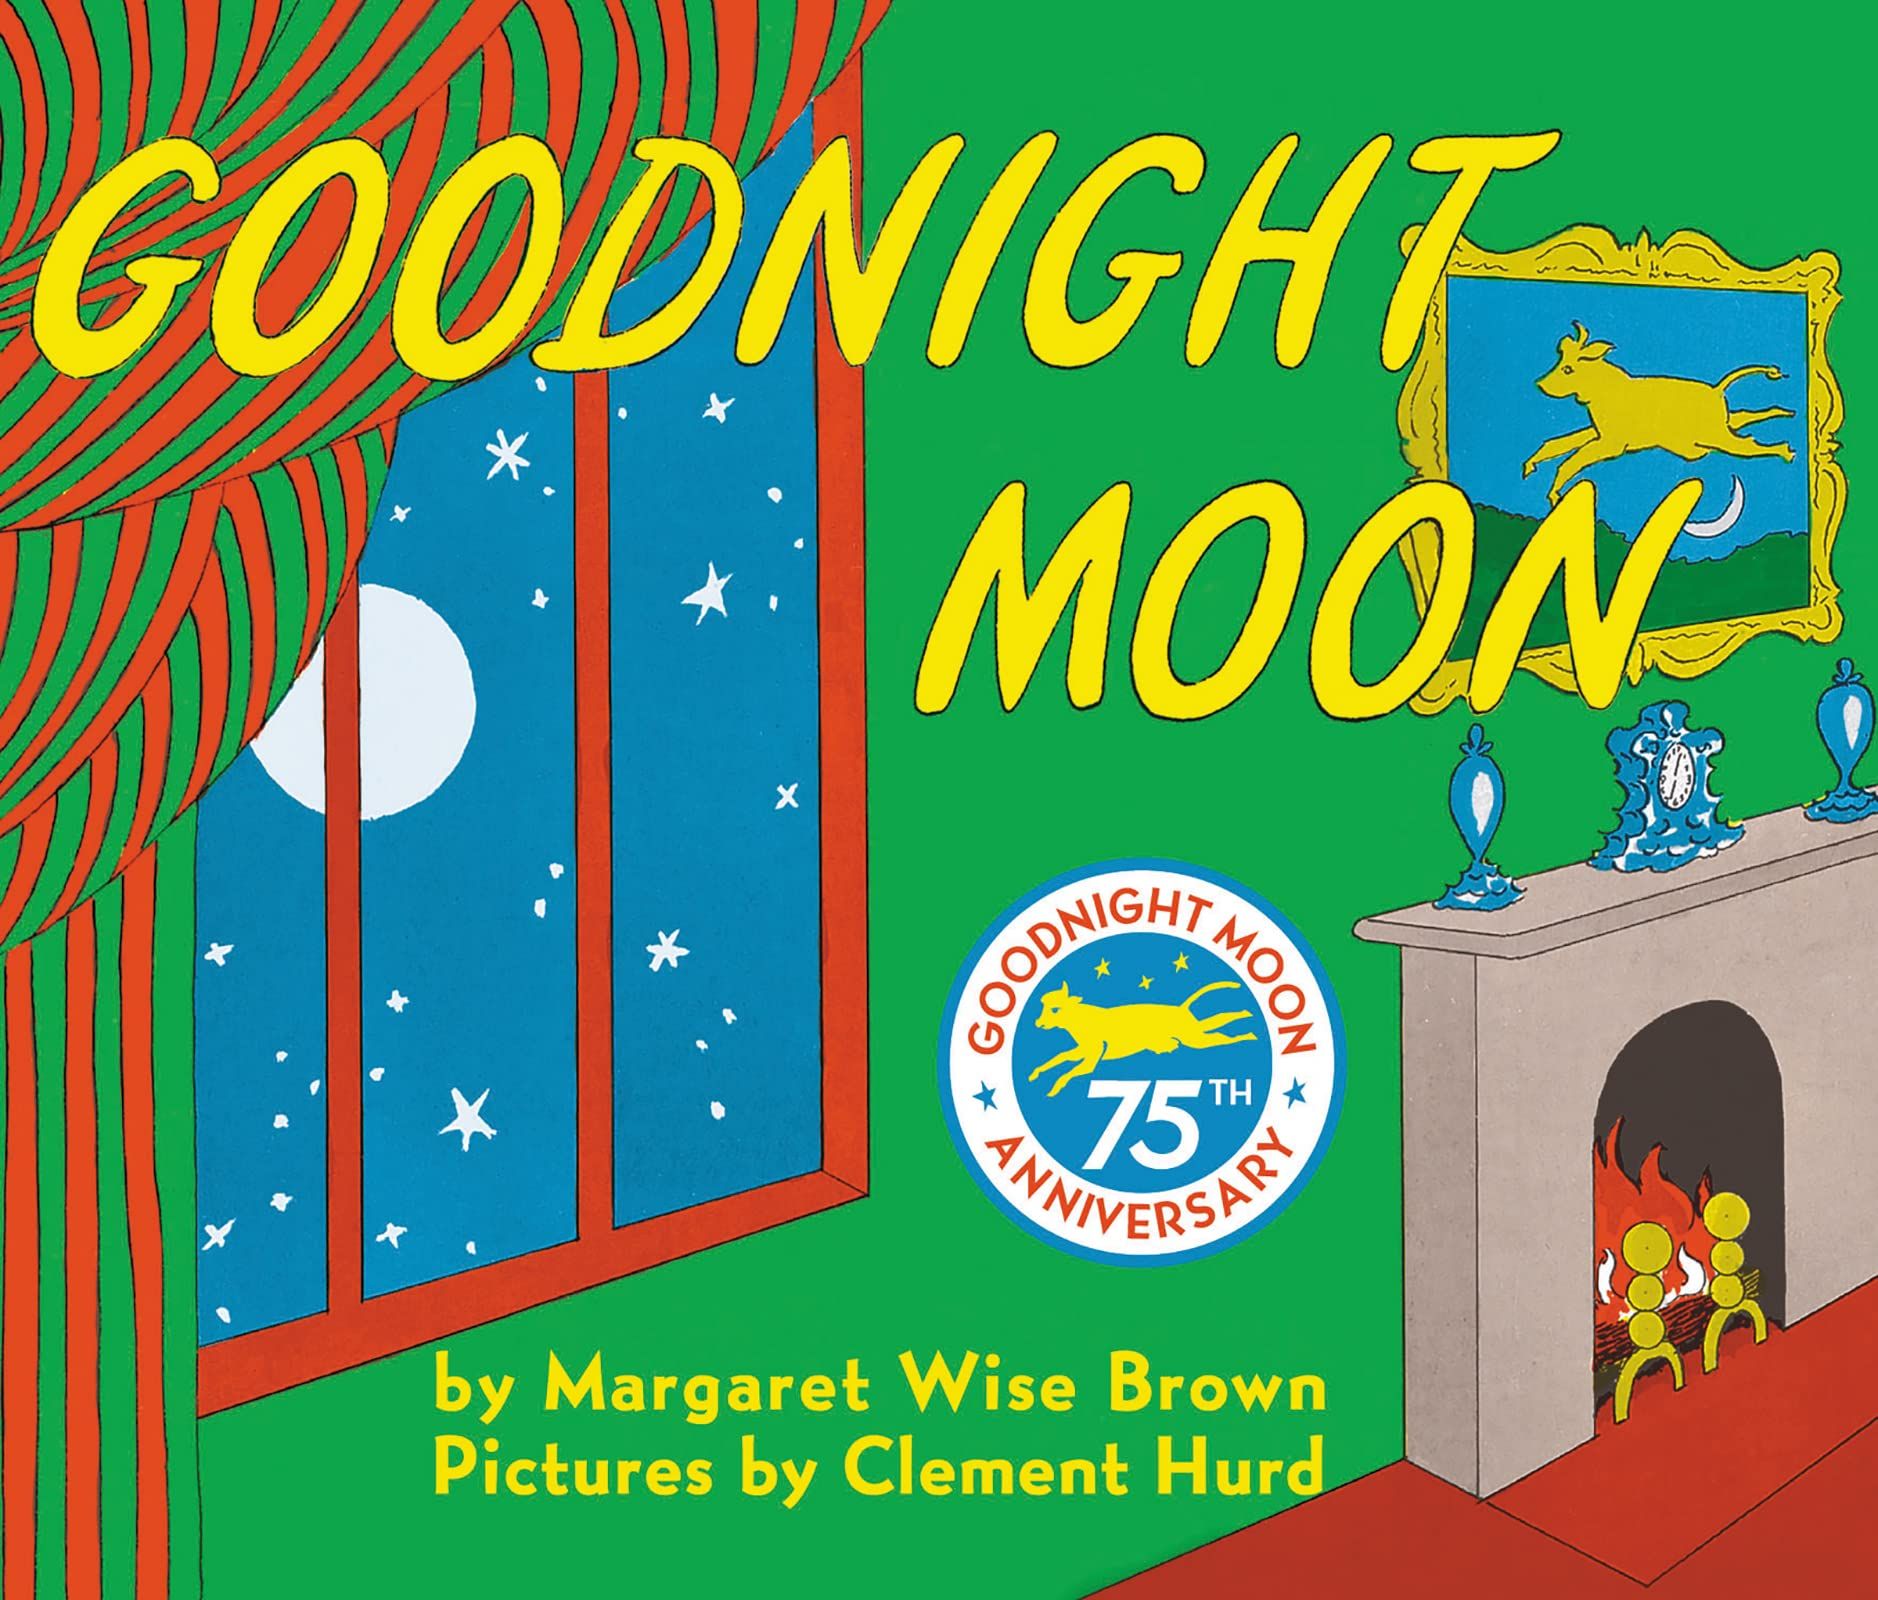 <p><strong>$5.36</strong></p><p>If you don't already own a copy of this classic, you owe it to your kid's bookshelf to pick up a copy. The board book version is sturdy enough for your toddler to read at home or to bring along on trips where a comfort object will make bedtime easier. </p>